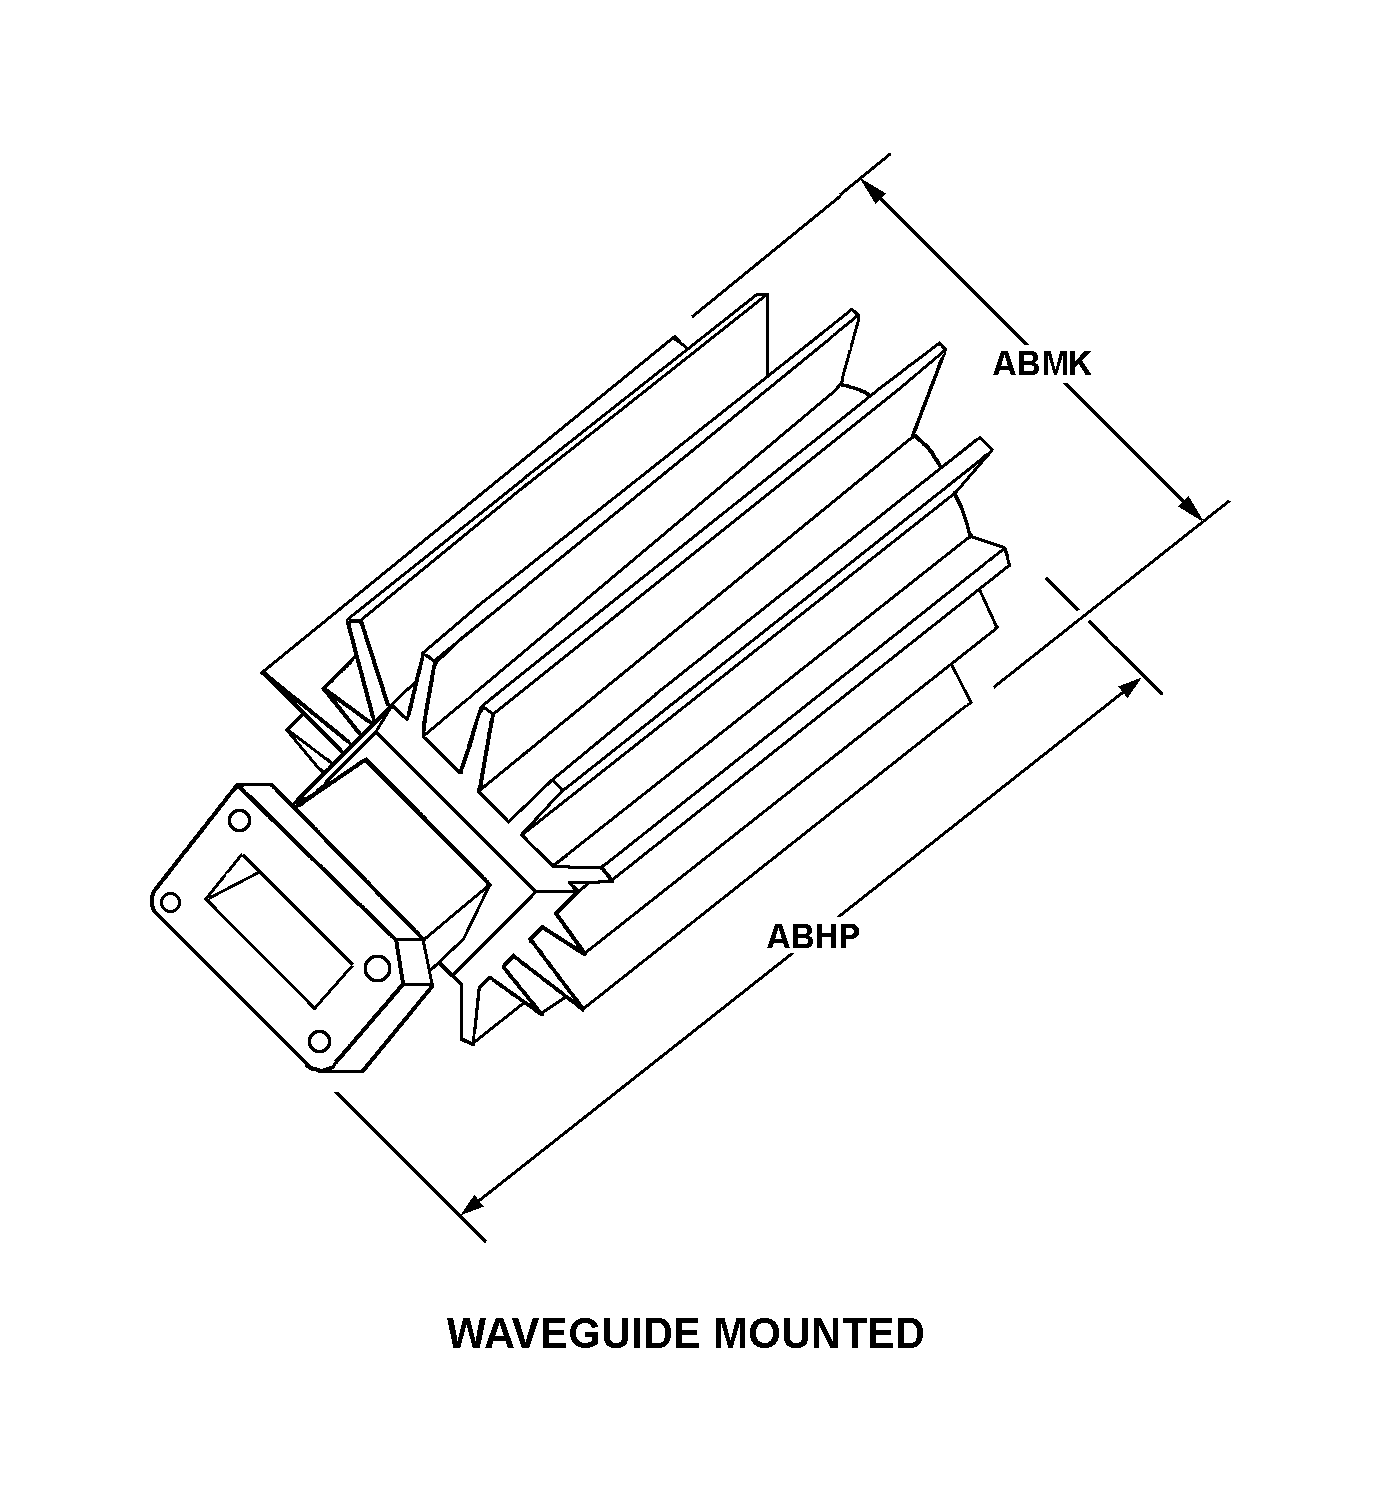 WAVEGUIDE MOUNTED style nsn 5985-01-141-9681